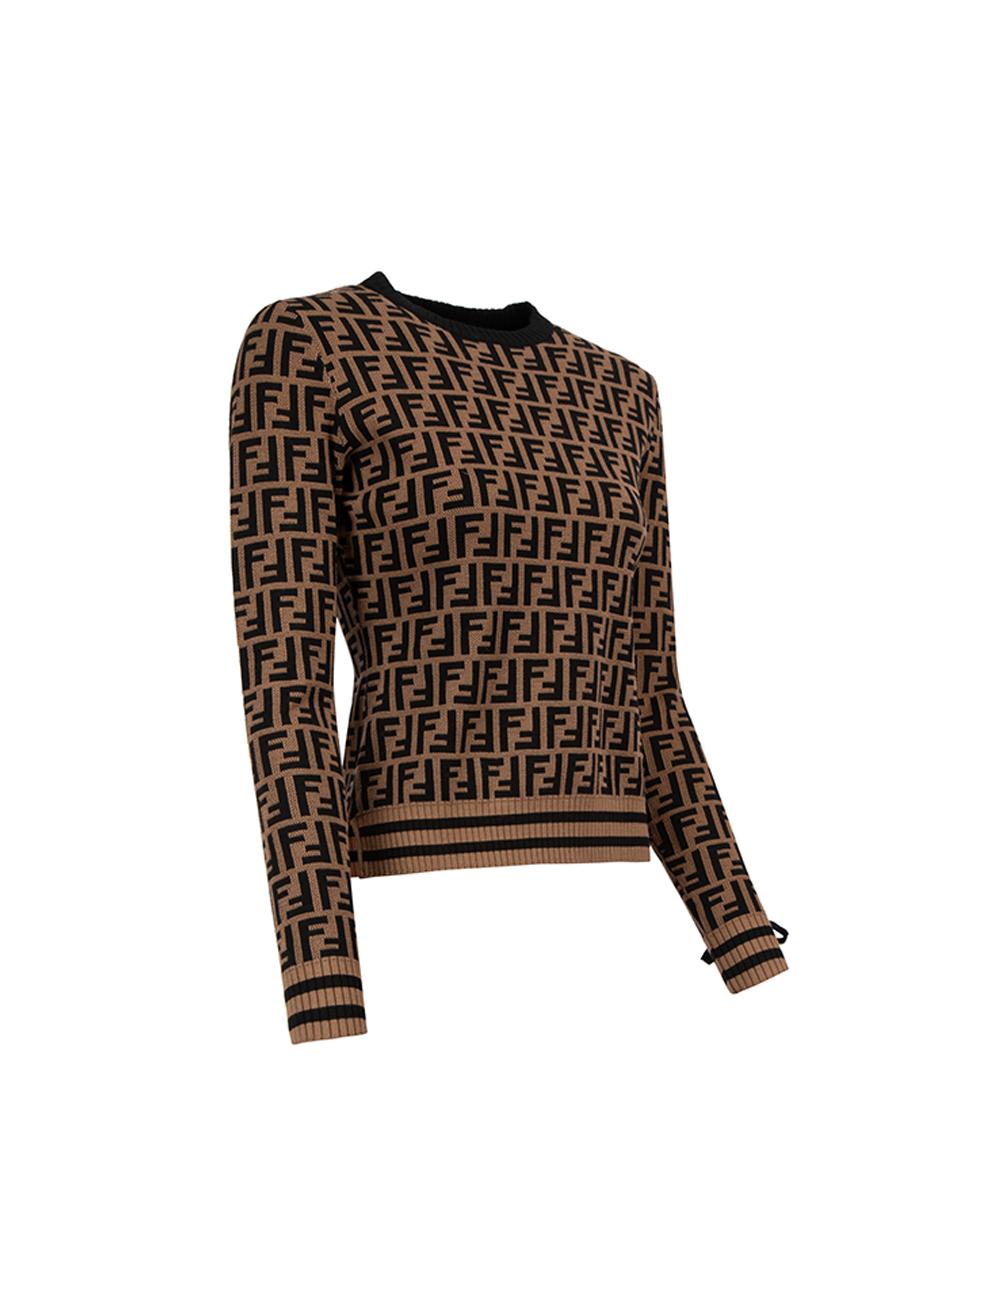 CONDITION is Very good. Hardly any visible wear to sweater is evident on this used Fendi designer resale item. 



Details


Brown

Viscose

Long sleeves knit sweater

FF Zucca pattern

Round neckline

Laced detail on sleeves





Made in